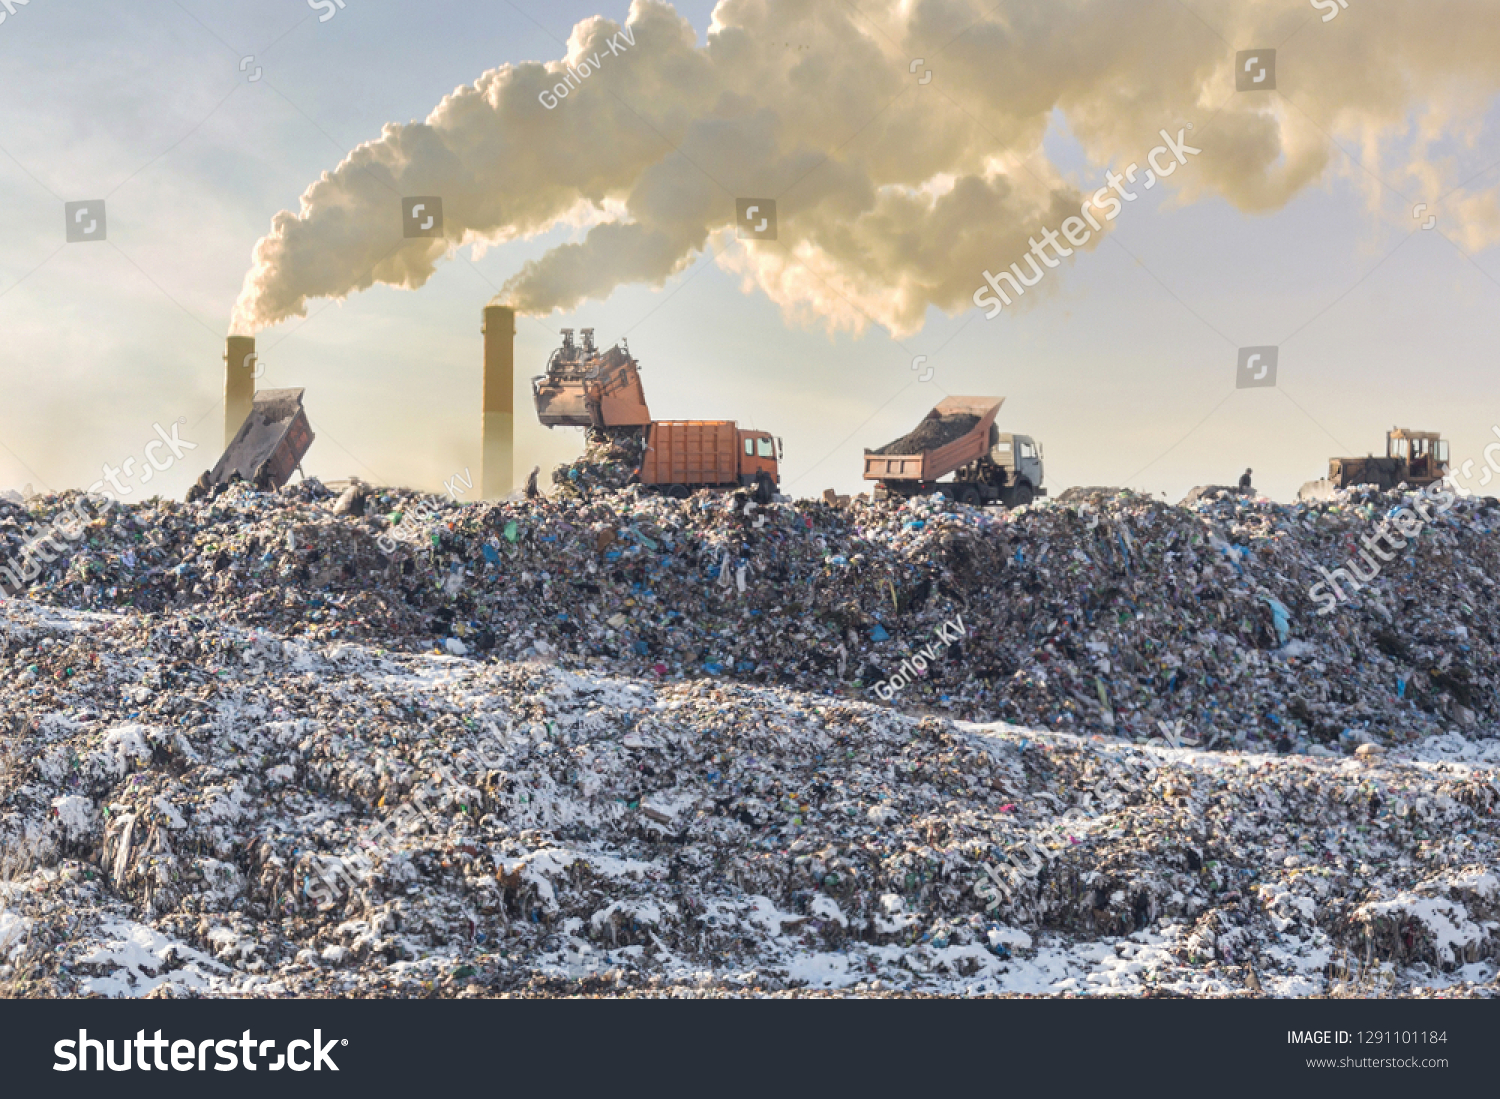 Dump trucks unloading garbage over vast landfill. Smoking industrial stacks on background. Environmental pollution. Outdated method of waste disposal. Survival of times past #1291101184